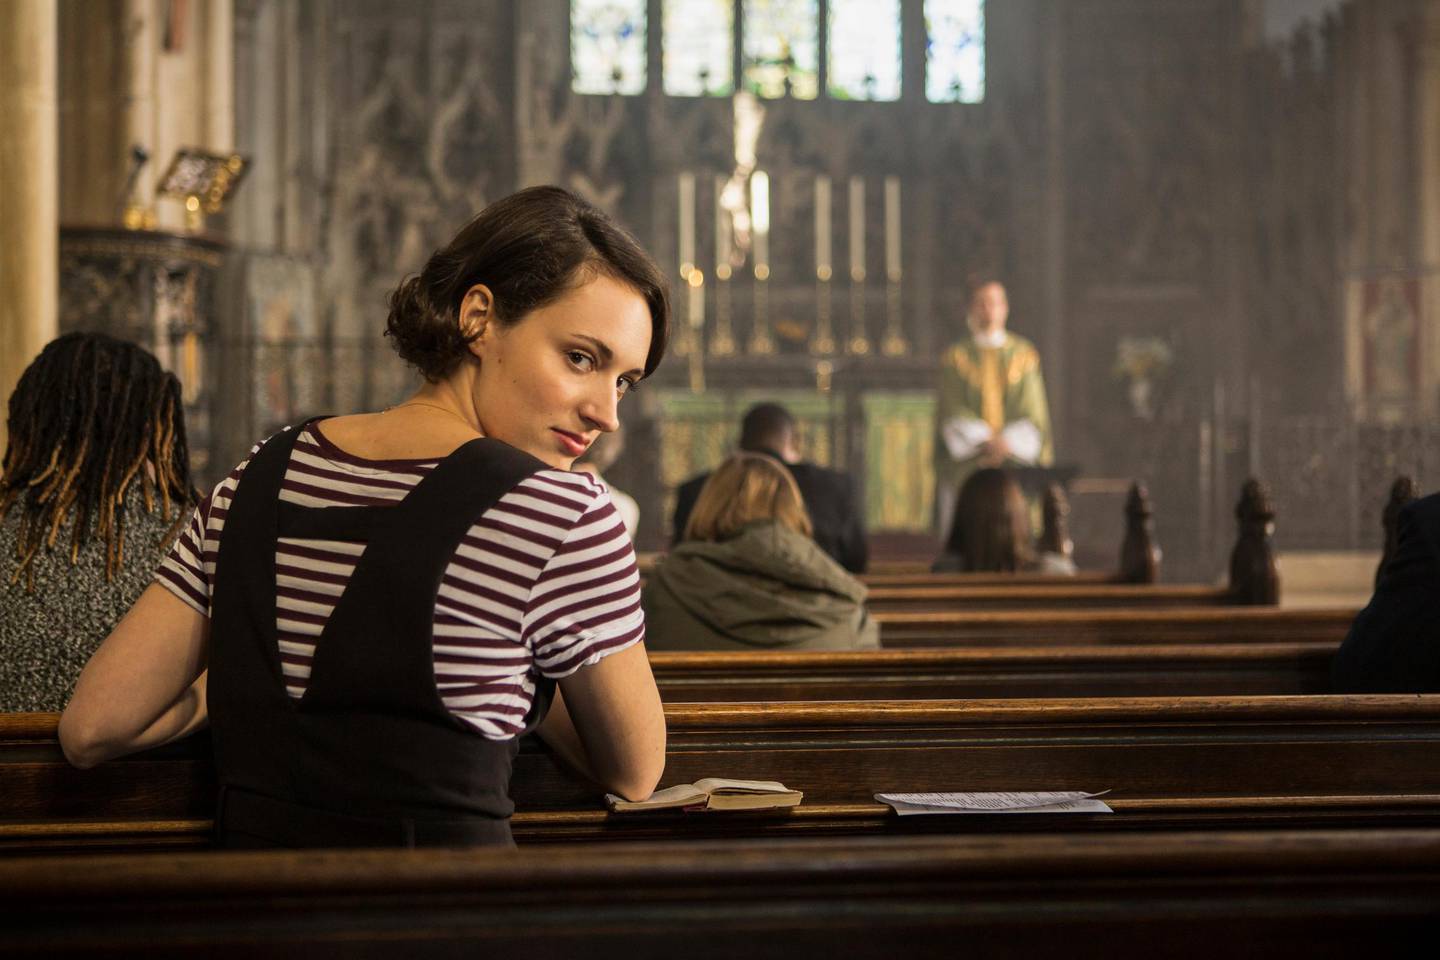 This image released by Amazon Studios shows Phoebe Waller-Bridge in "Fleabag." The comedy series was named one of the top ten TV shows of the year by the Associated Press. (Amazon Studios via AP)